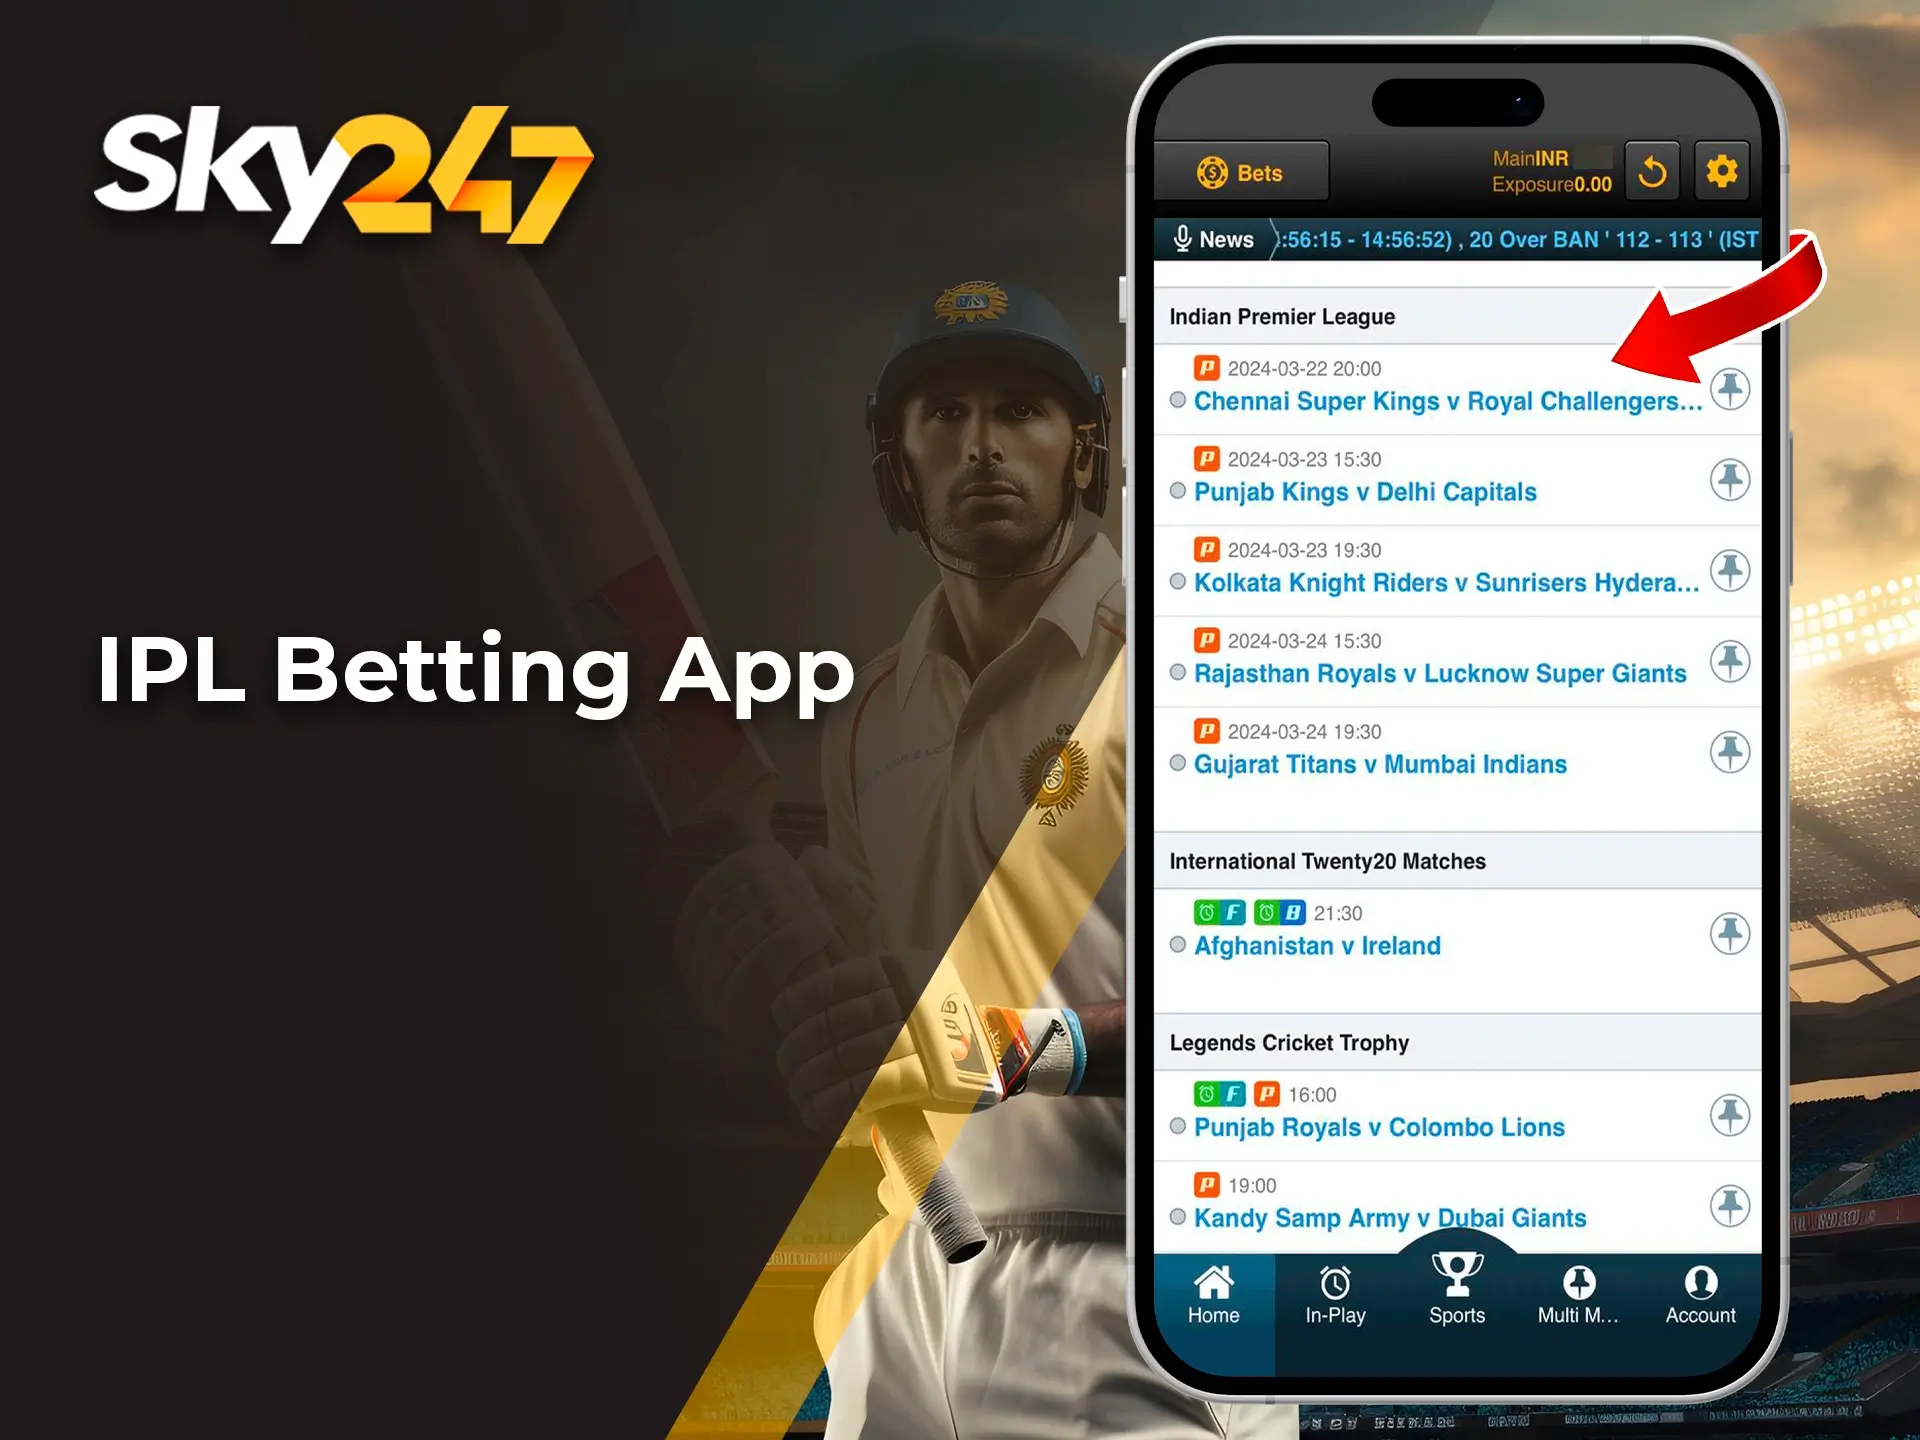 The state-of-the-art Sky247 app will always give you quick access to the IPL championship and will instantly take your prediction into account.